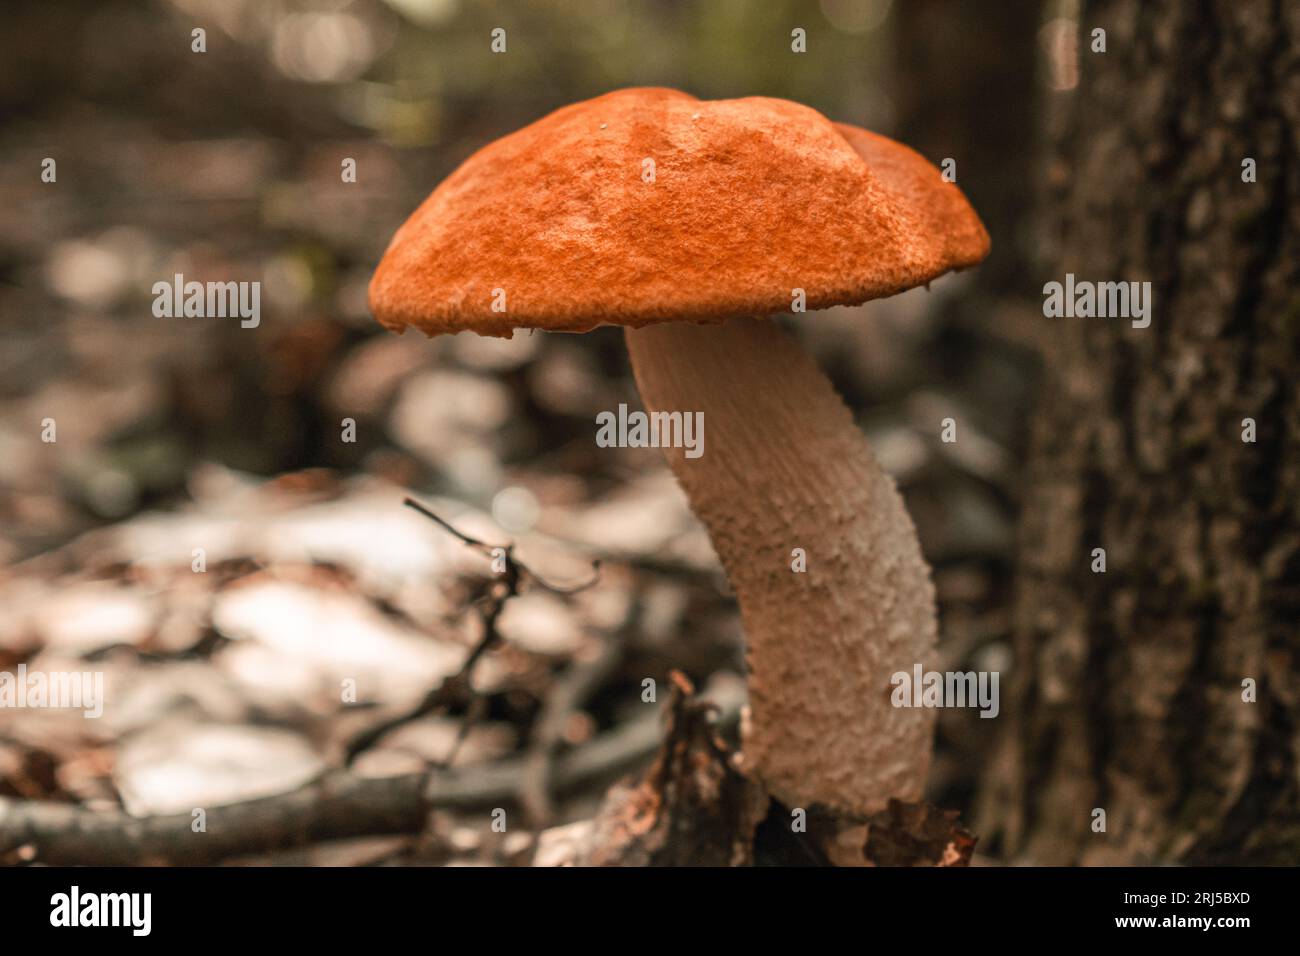 Edible mushrooms Boletus close-up in the forest. Stock Photo